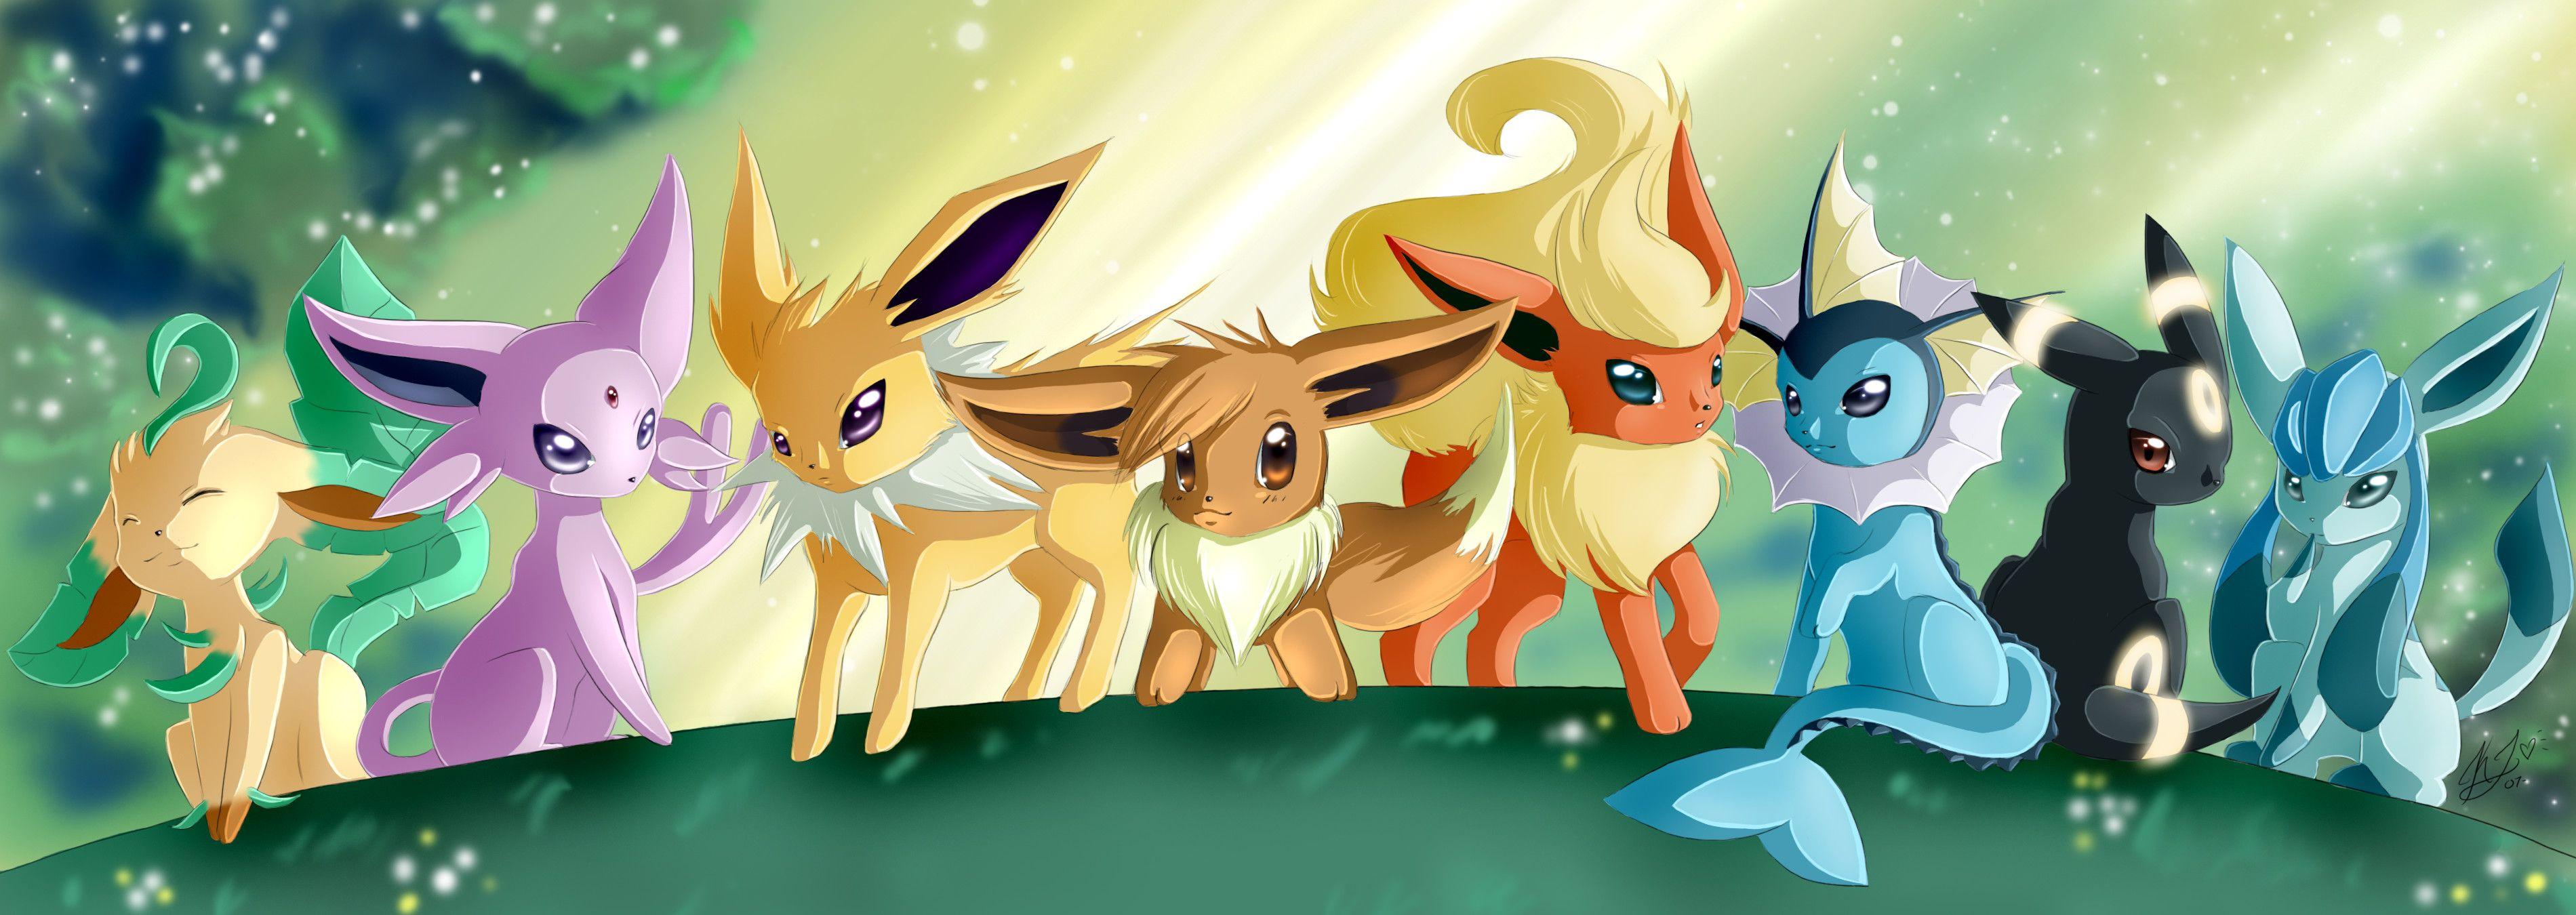 Evee Wallpapers - Top Free Evee Backgrounds - WallpaperAccess